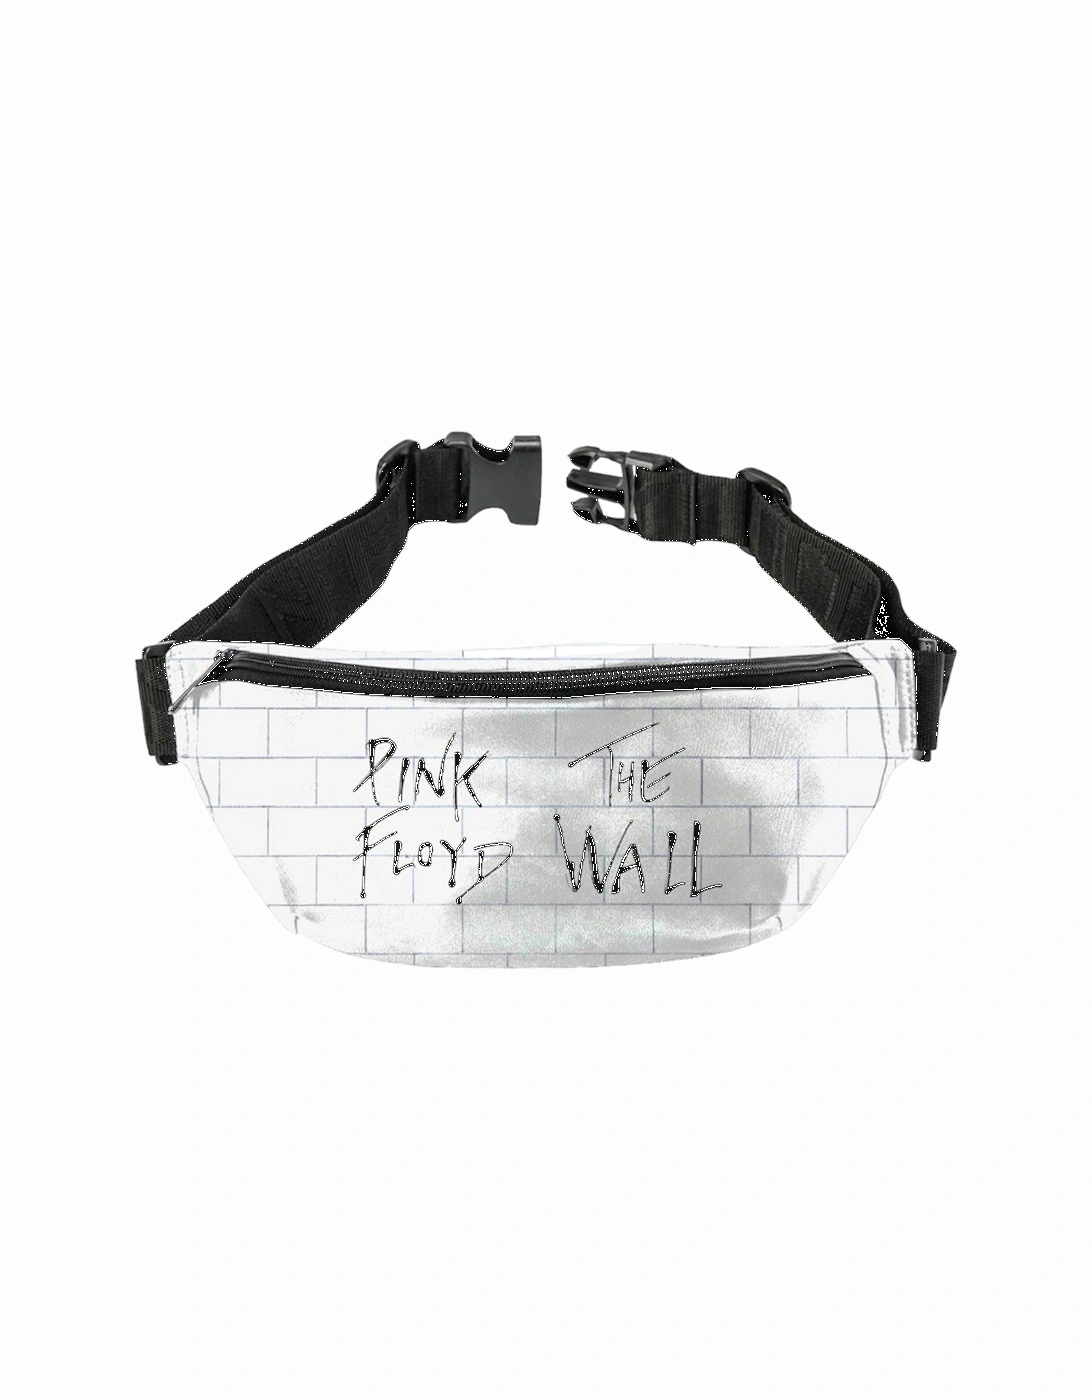 The Wall Pink Floyd Bum Bag, 2 of 1